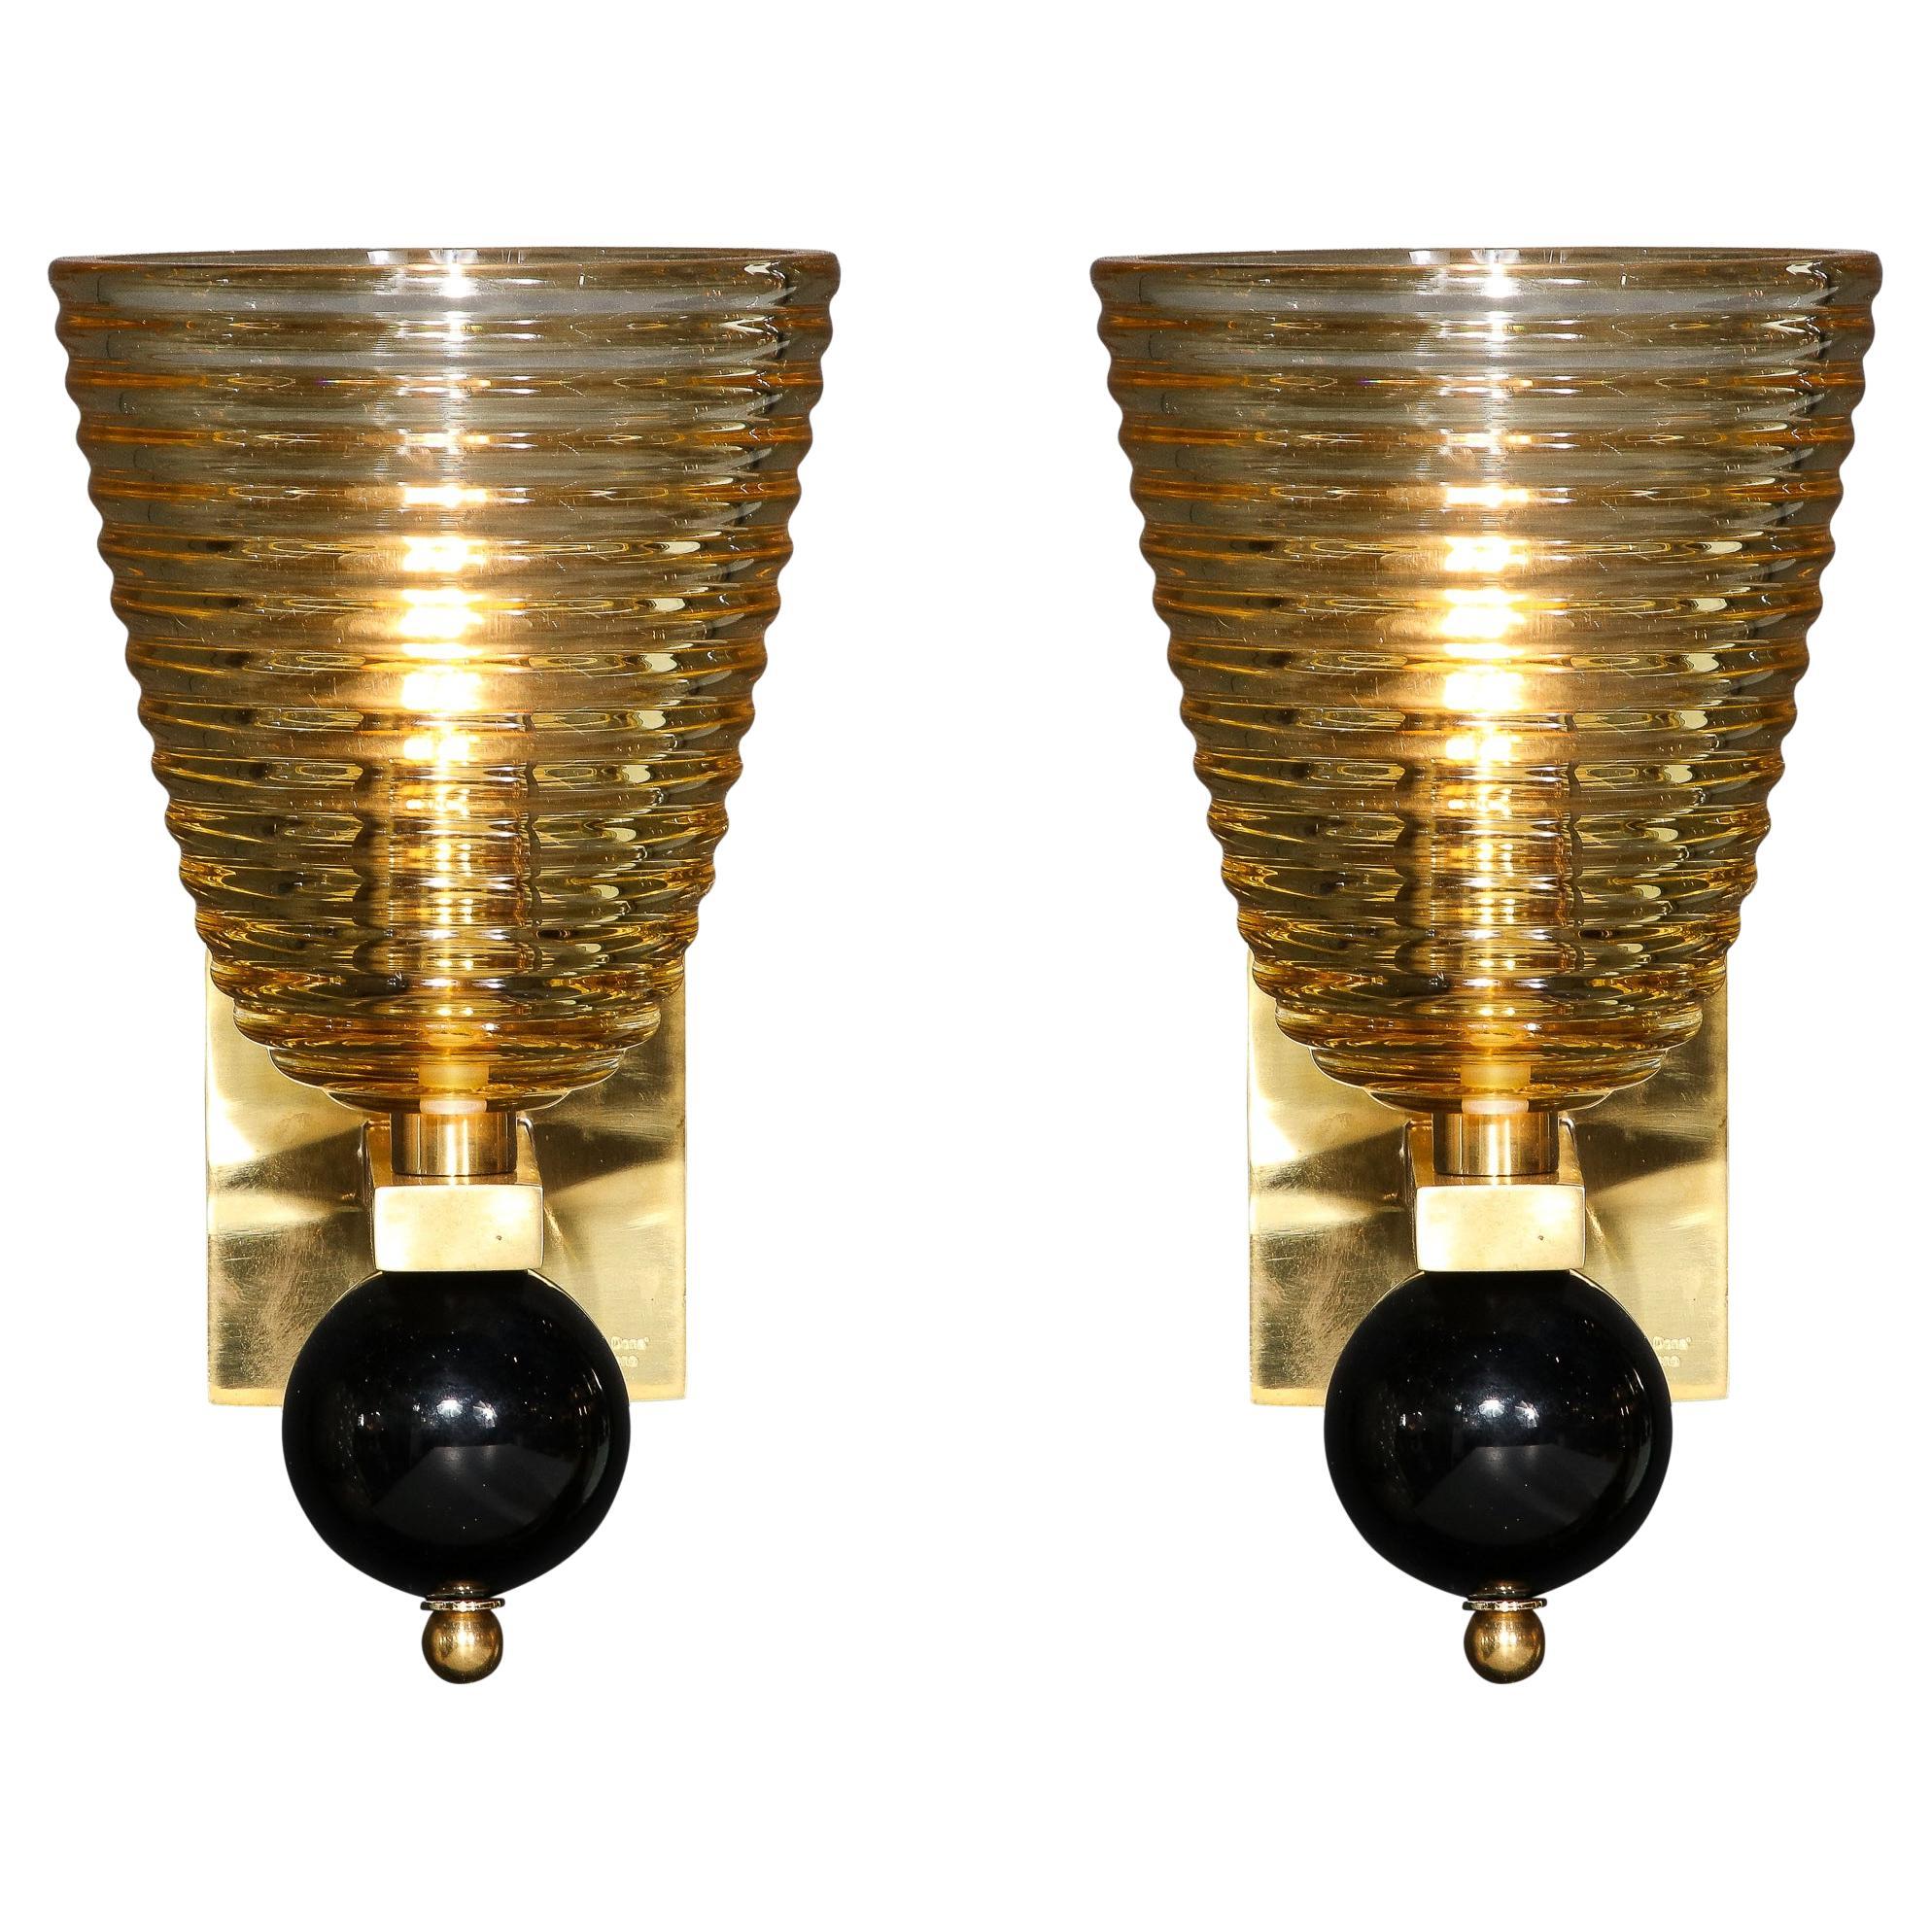 Pair of Modernist Hand-Blown Murano Hive Glass Form Sconces w/ Jet Black Orbital For Sale